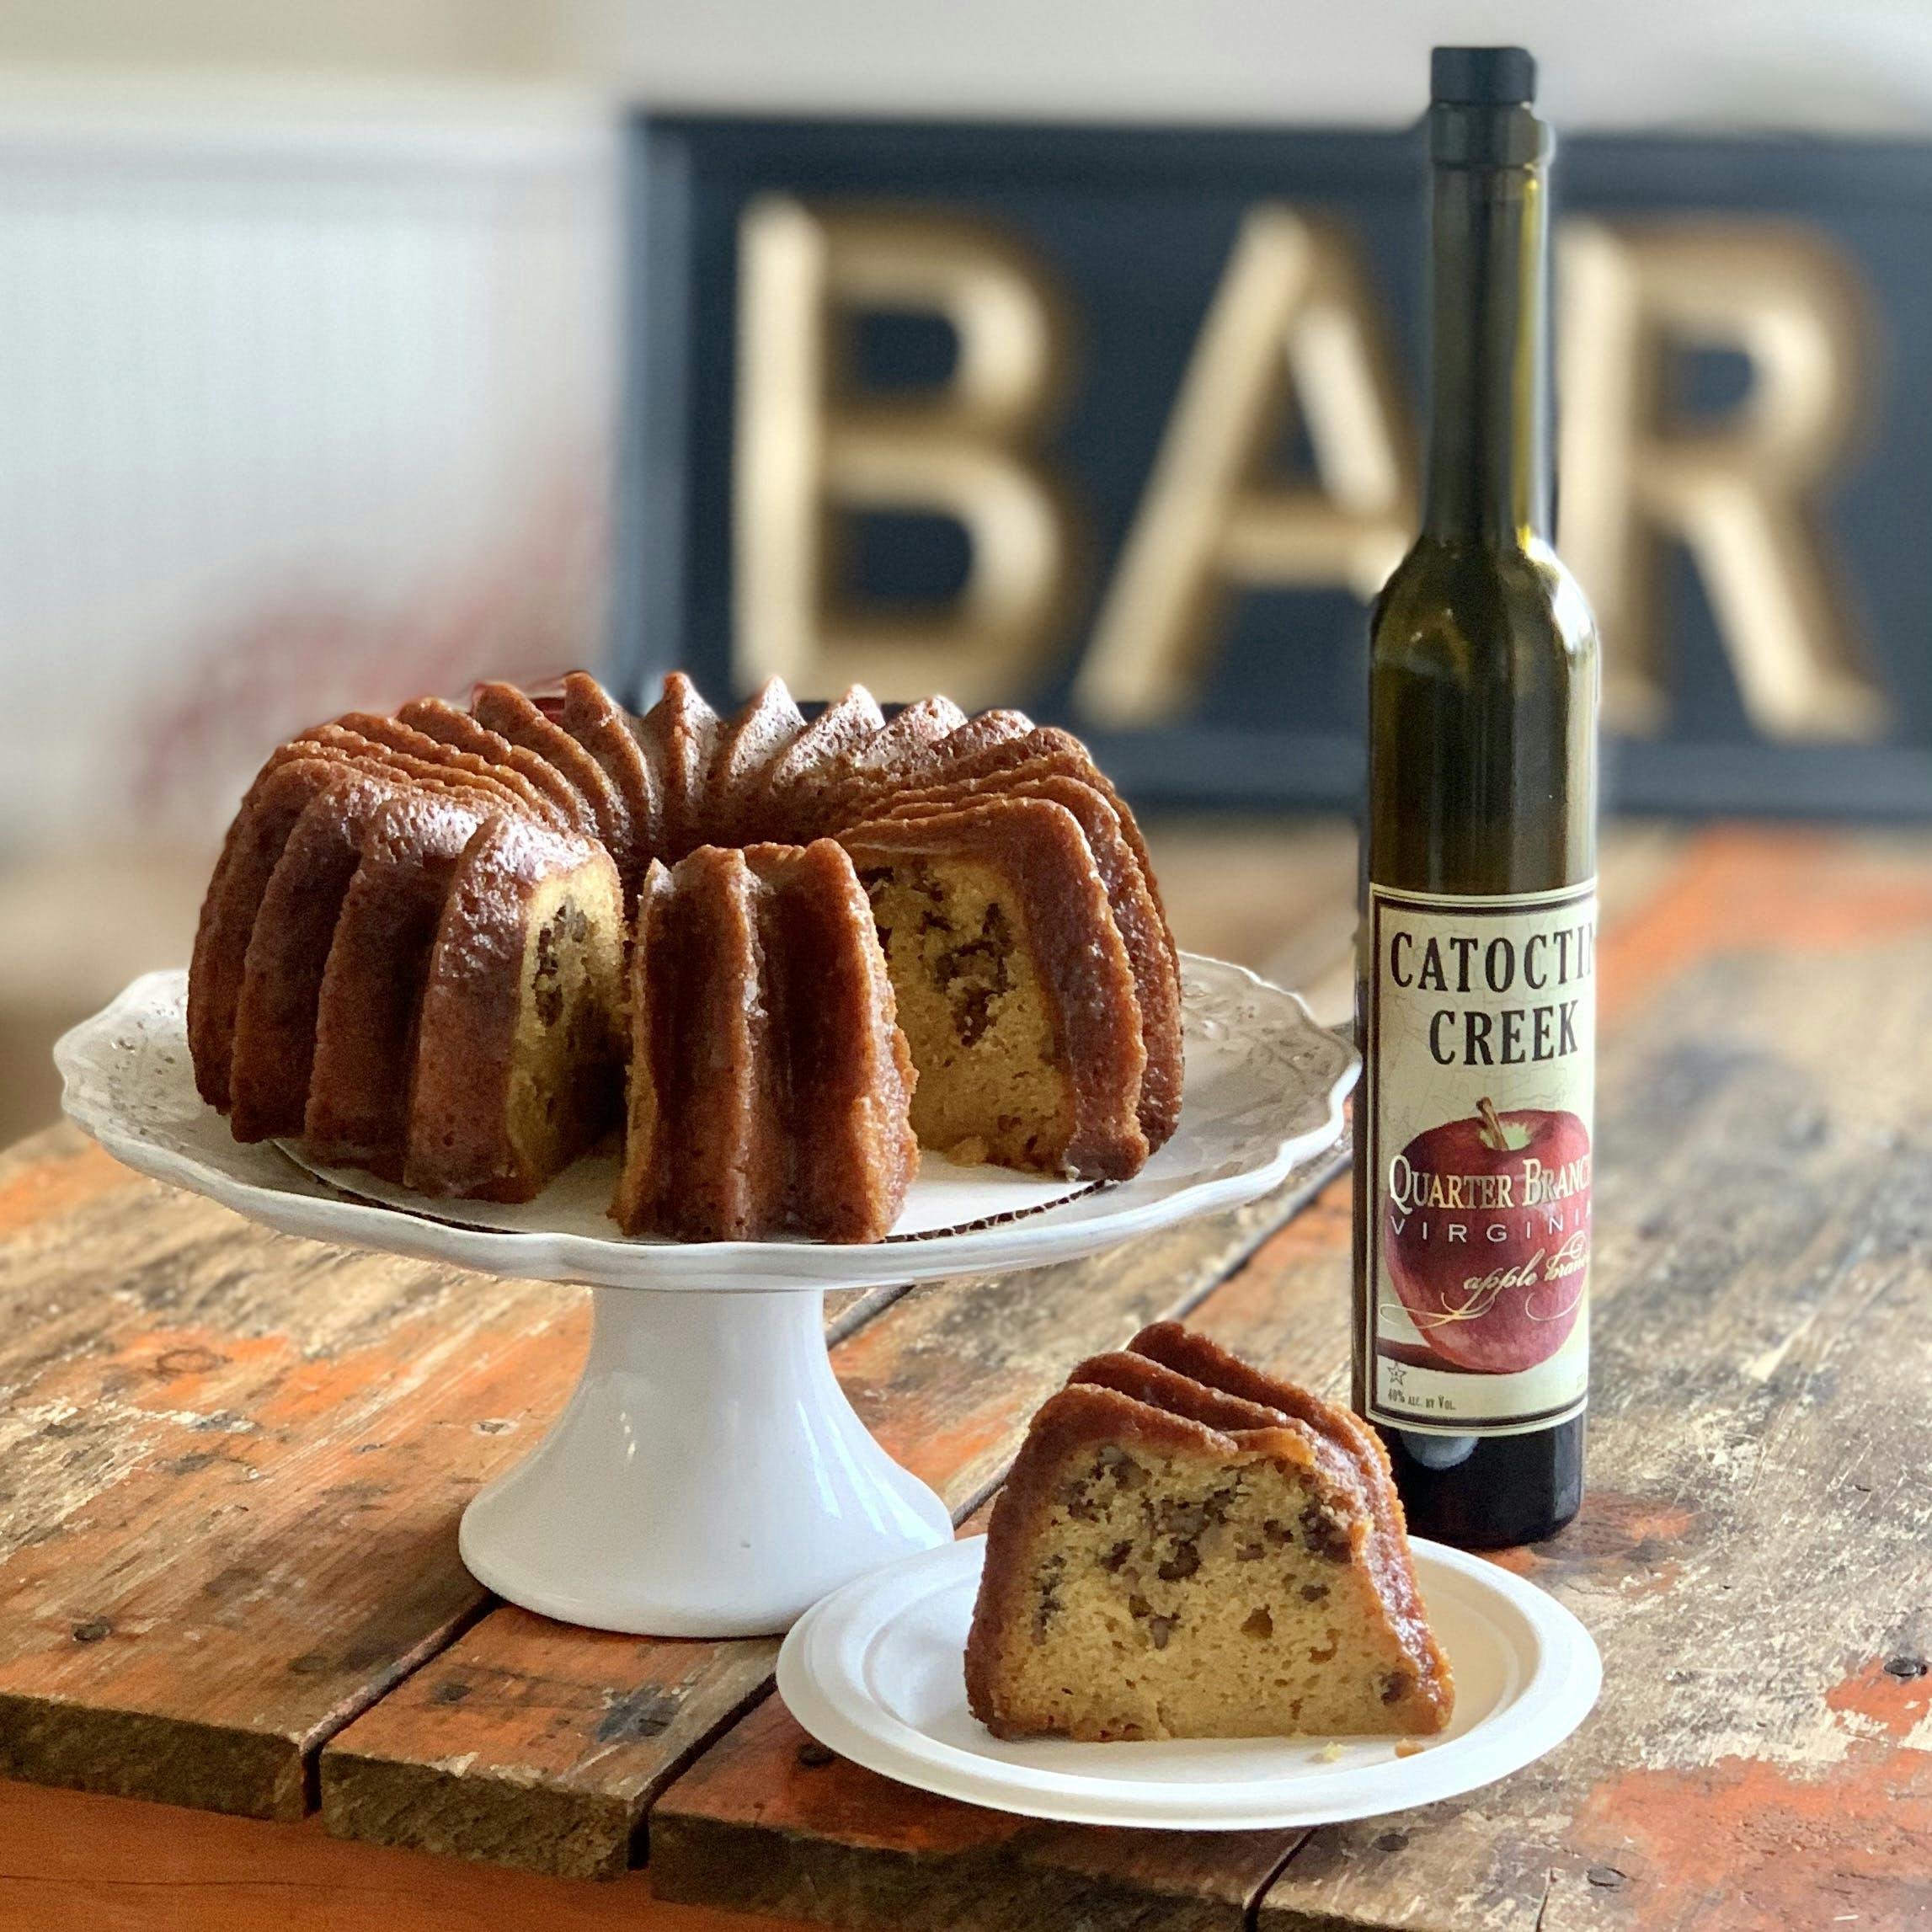 Nothing Bundt Cakes - Many of our bakeries are open to serve you and offer  no-contact delivery and curbside pickup for your safety and convenience.  You can simply order online or over